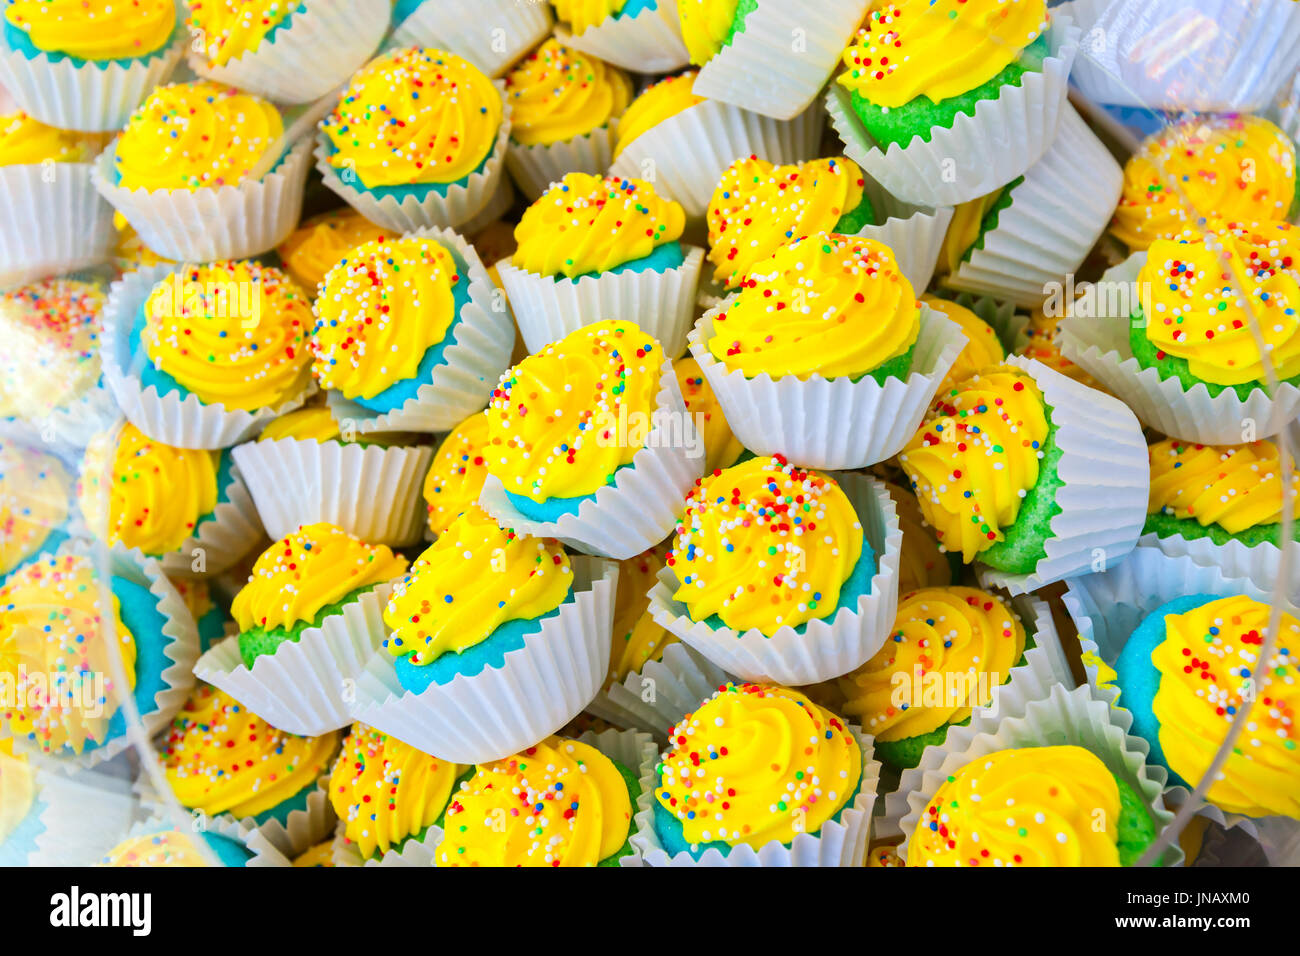 Pile of colorful homemade cakes in paper baskets with yellow cream Stock Photo